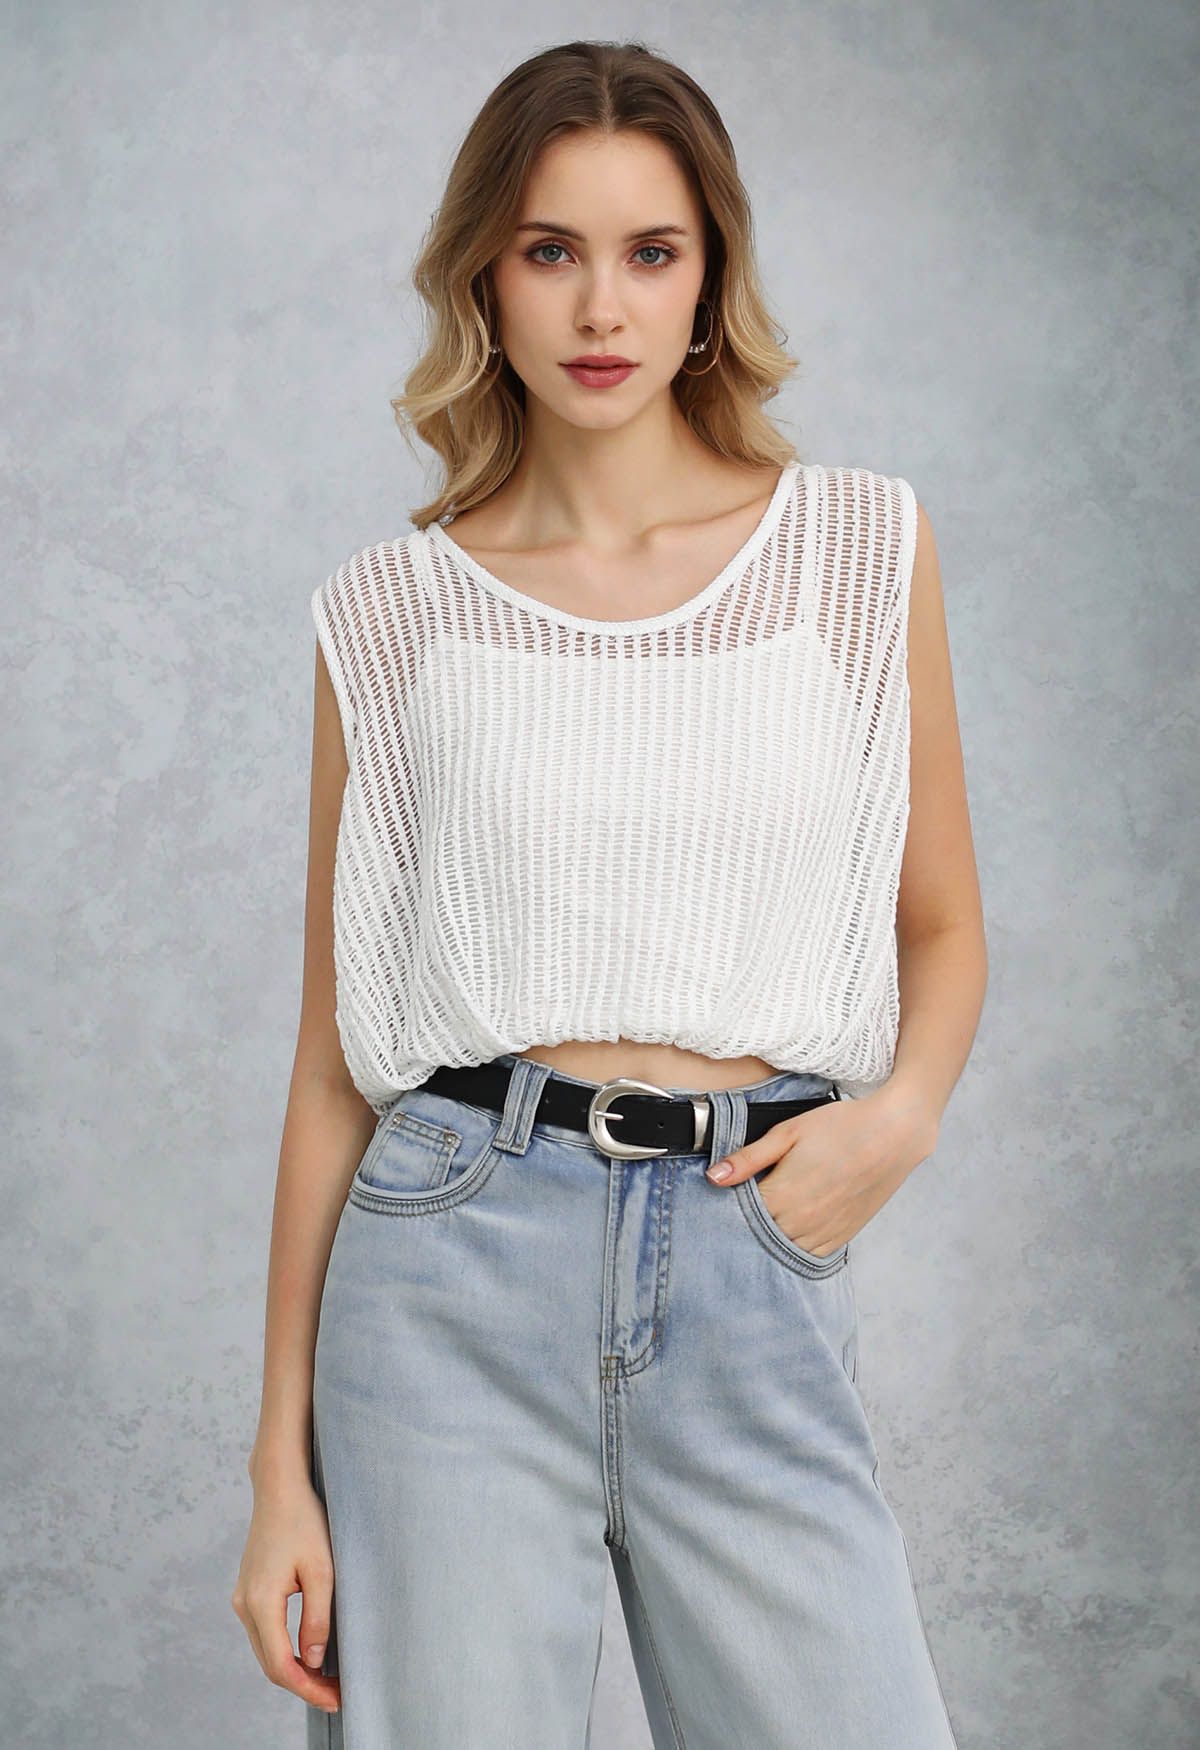 Hollow Out Sleeveless Crop Top in White